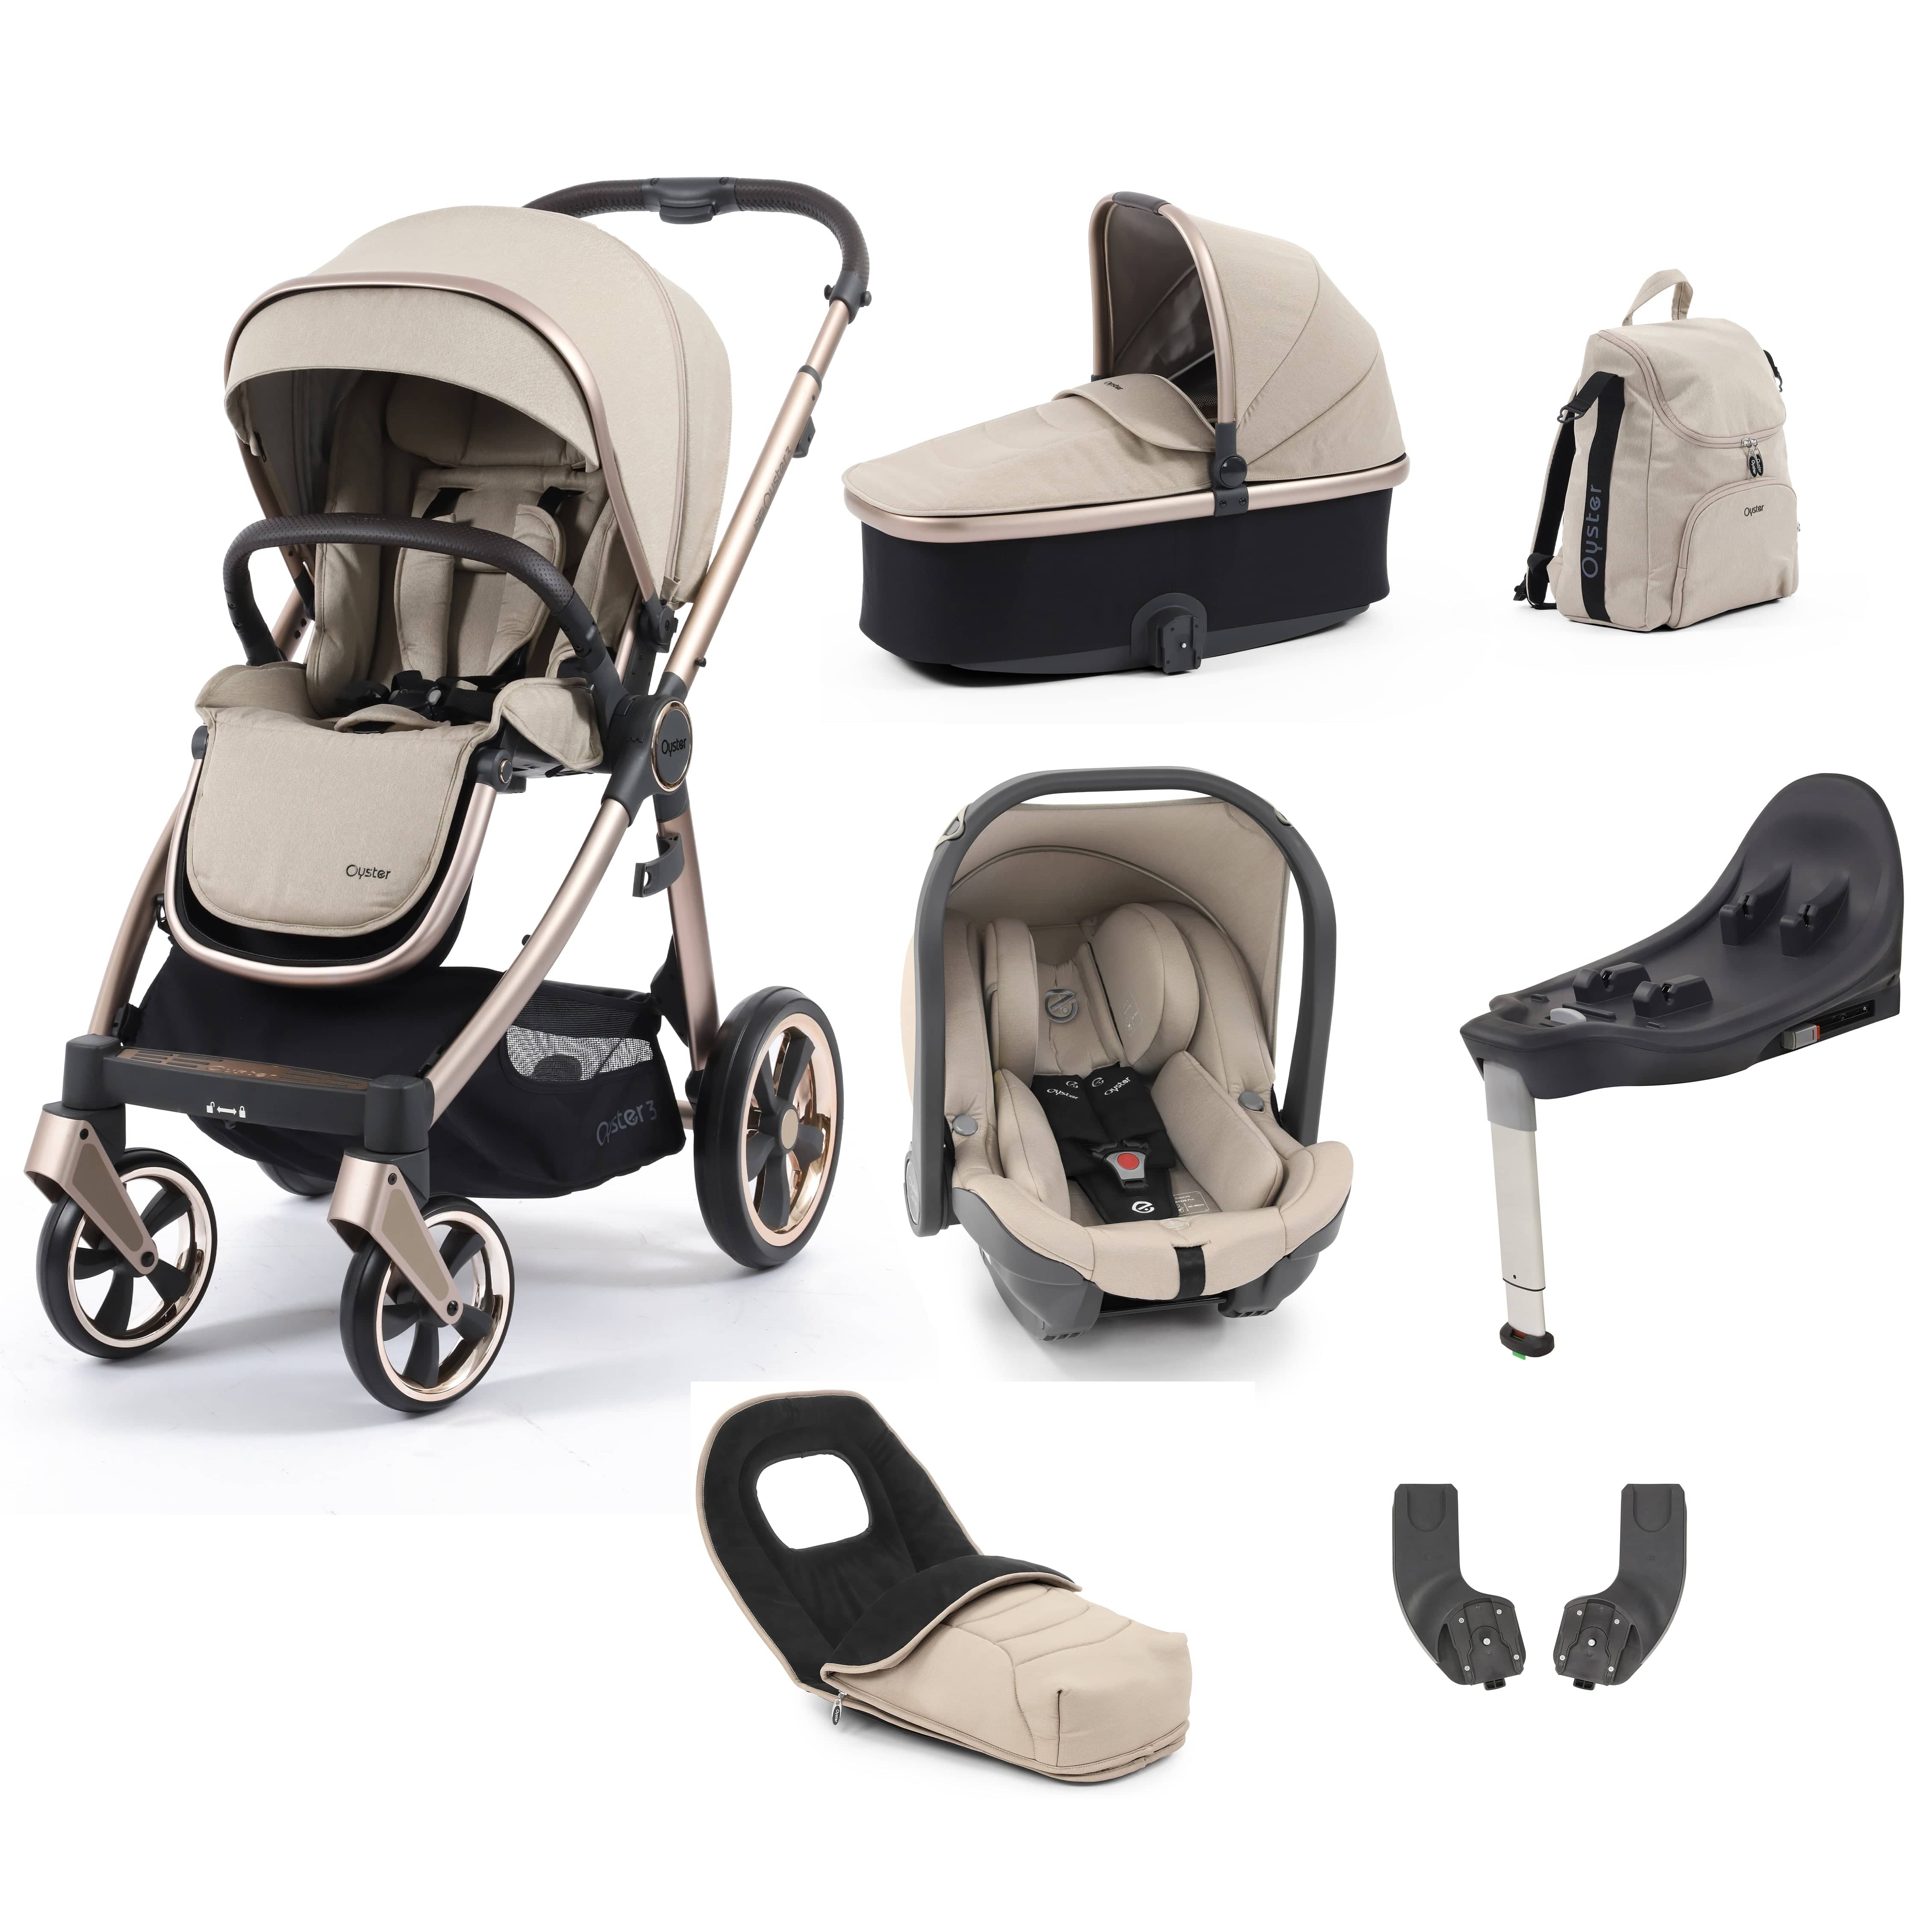 Babystyle Oyster 3 Luxury 7 Piece with Car Seat Bundle in Creme Brulee Travel Systems 14770-CMB 5060711567235